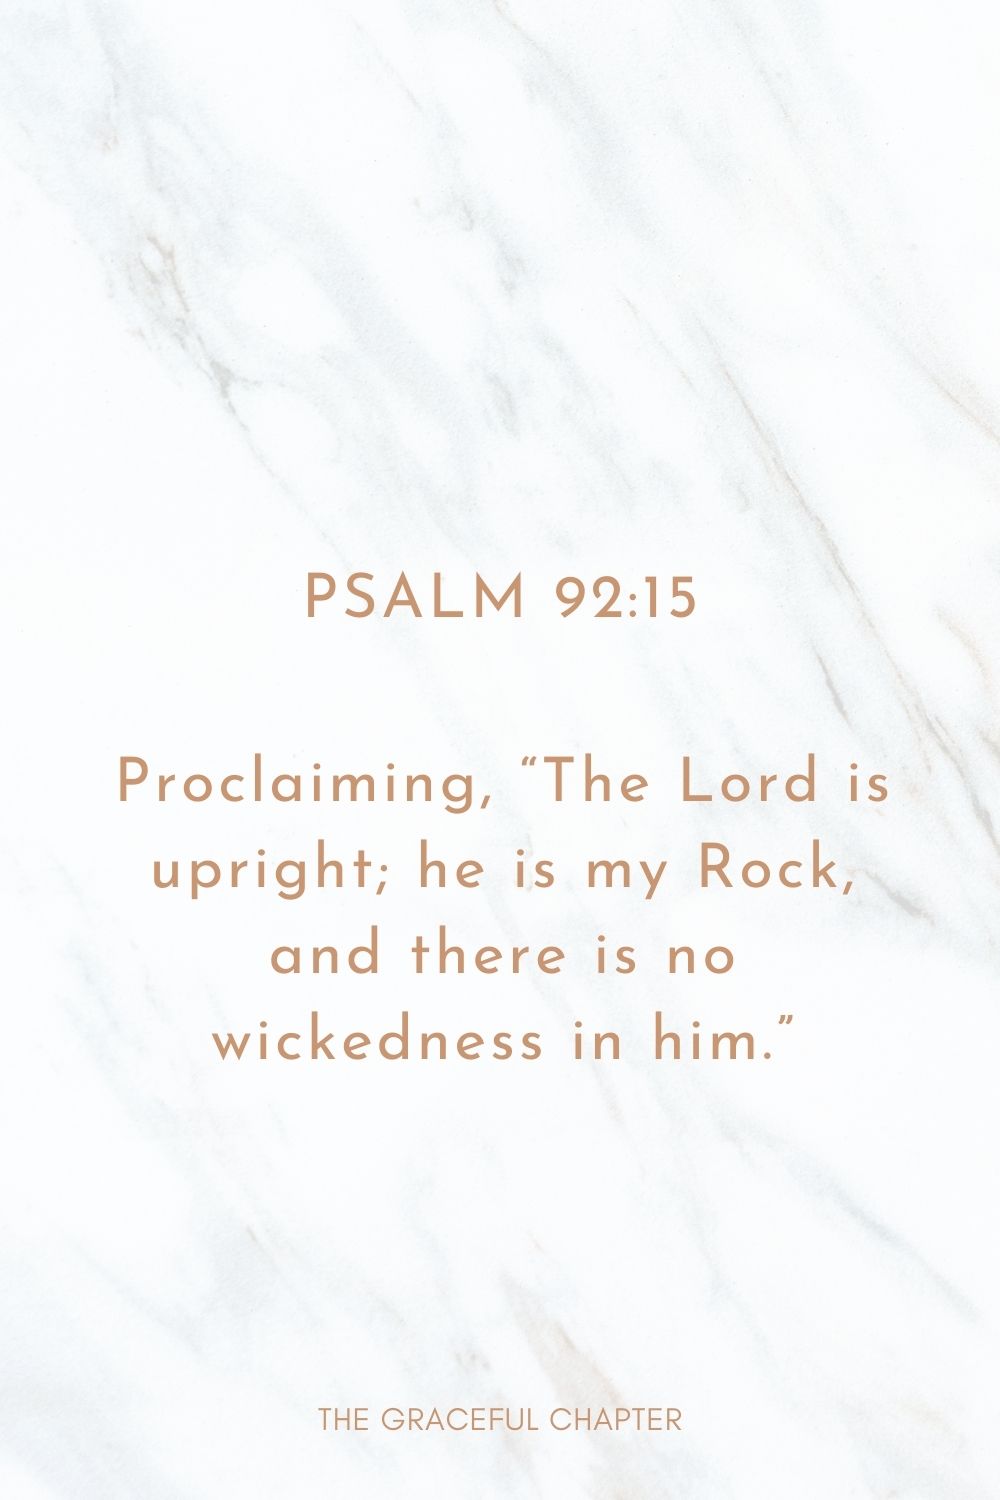 Proclaiming, “The Lord is upright; he is my Rock, and there is no wickedness in him.” Psalm 92:15